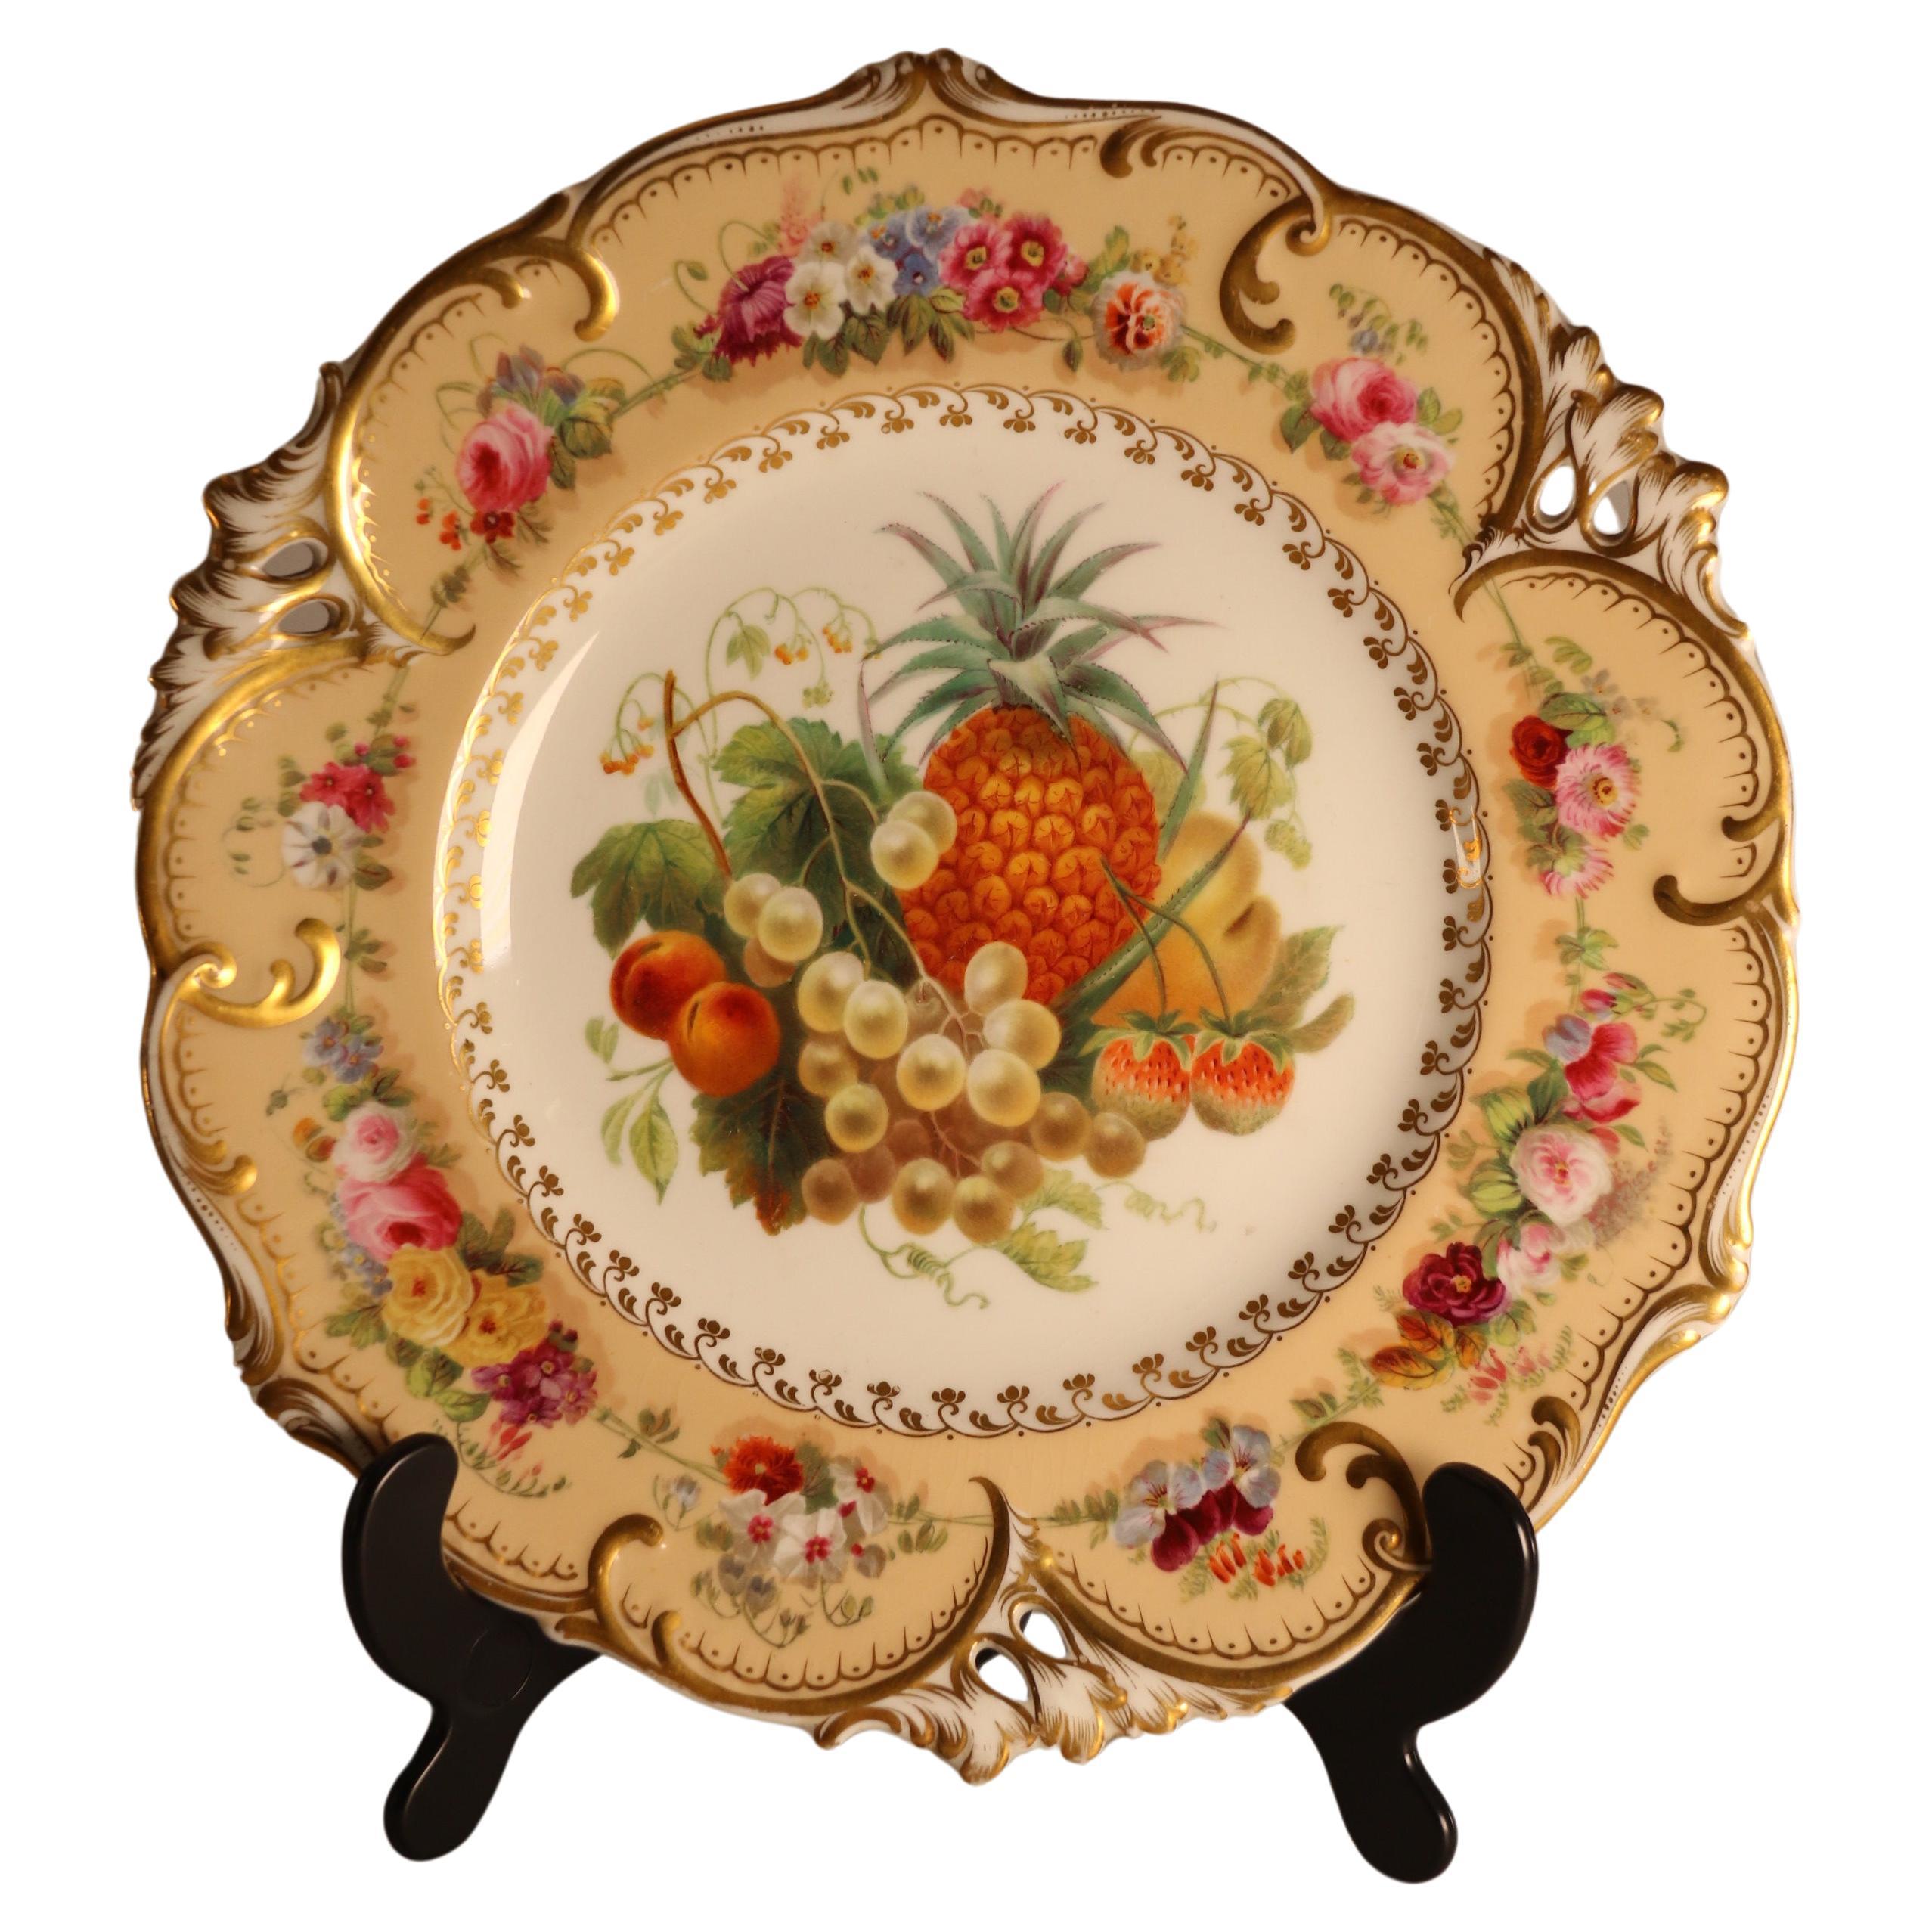 Early 19th  C Copeland porcelain hand painted fruit and flower cabinet plate For Sale